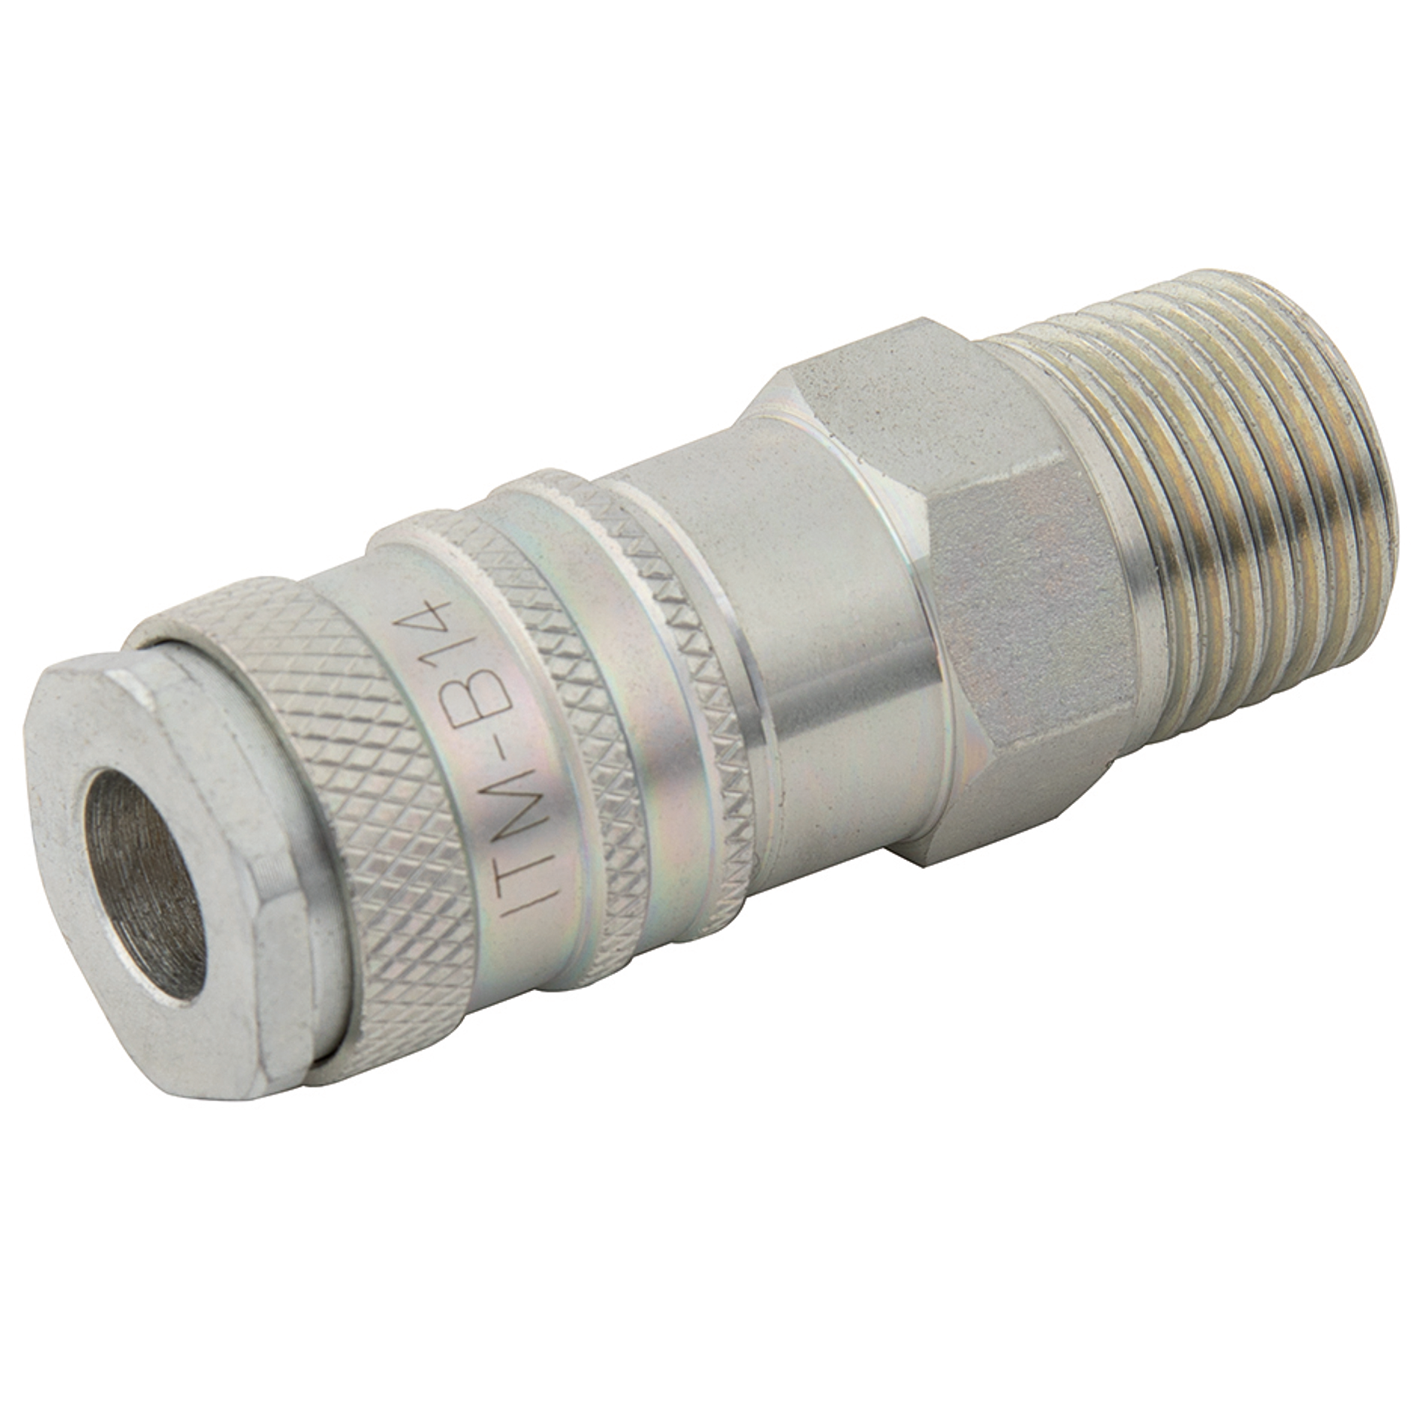 1/2" BSPT Male BE-14 Coupling